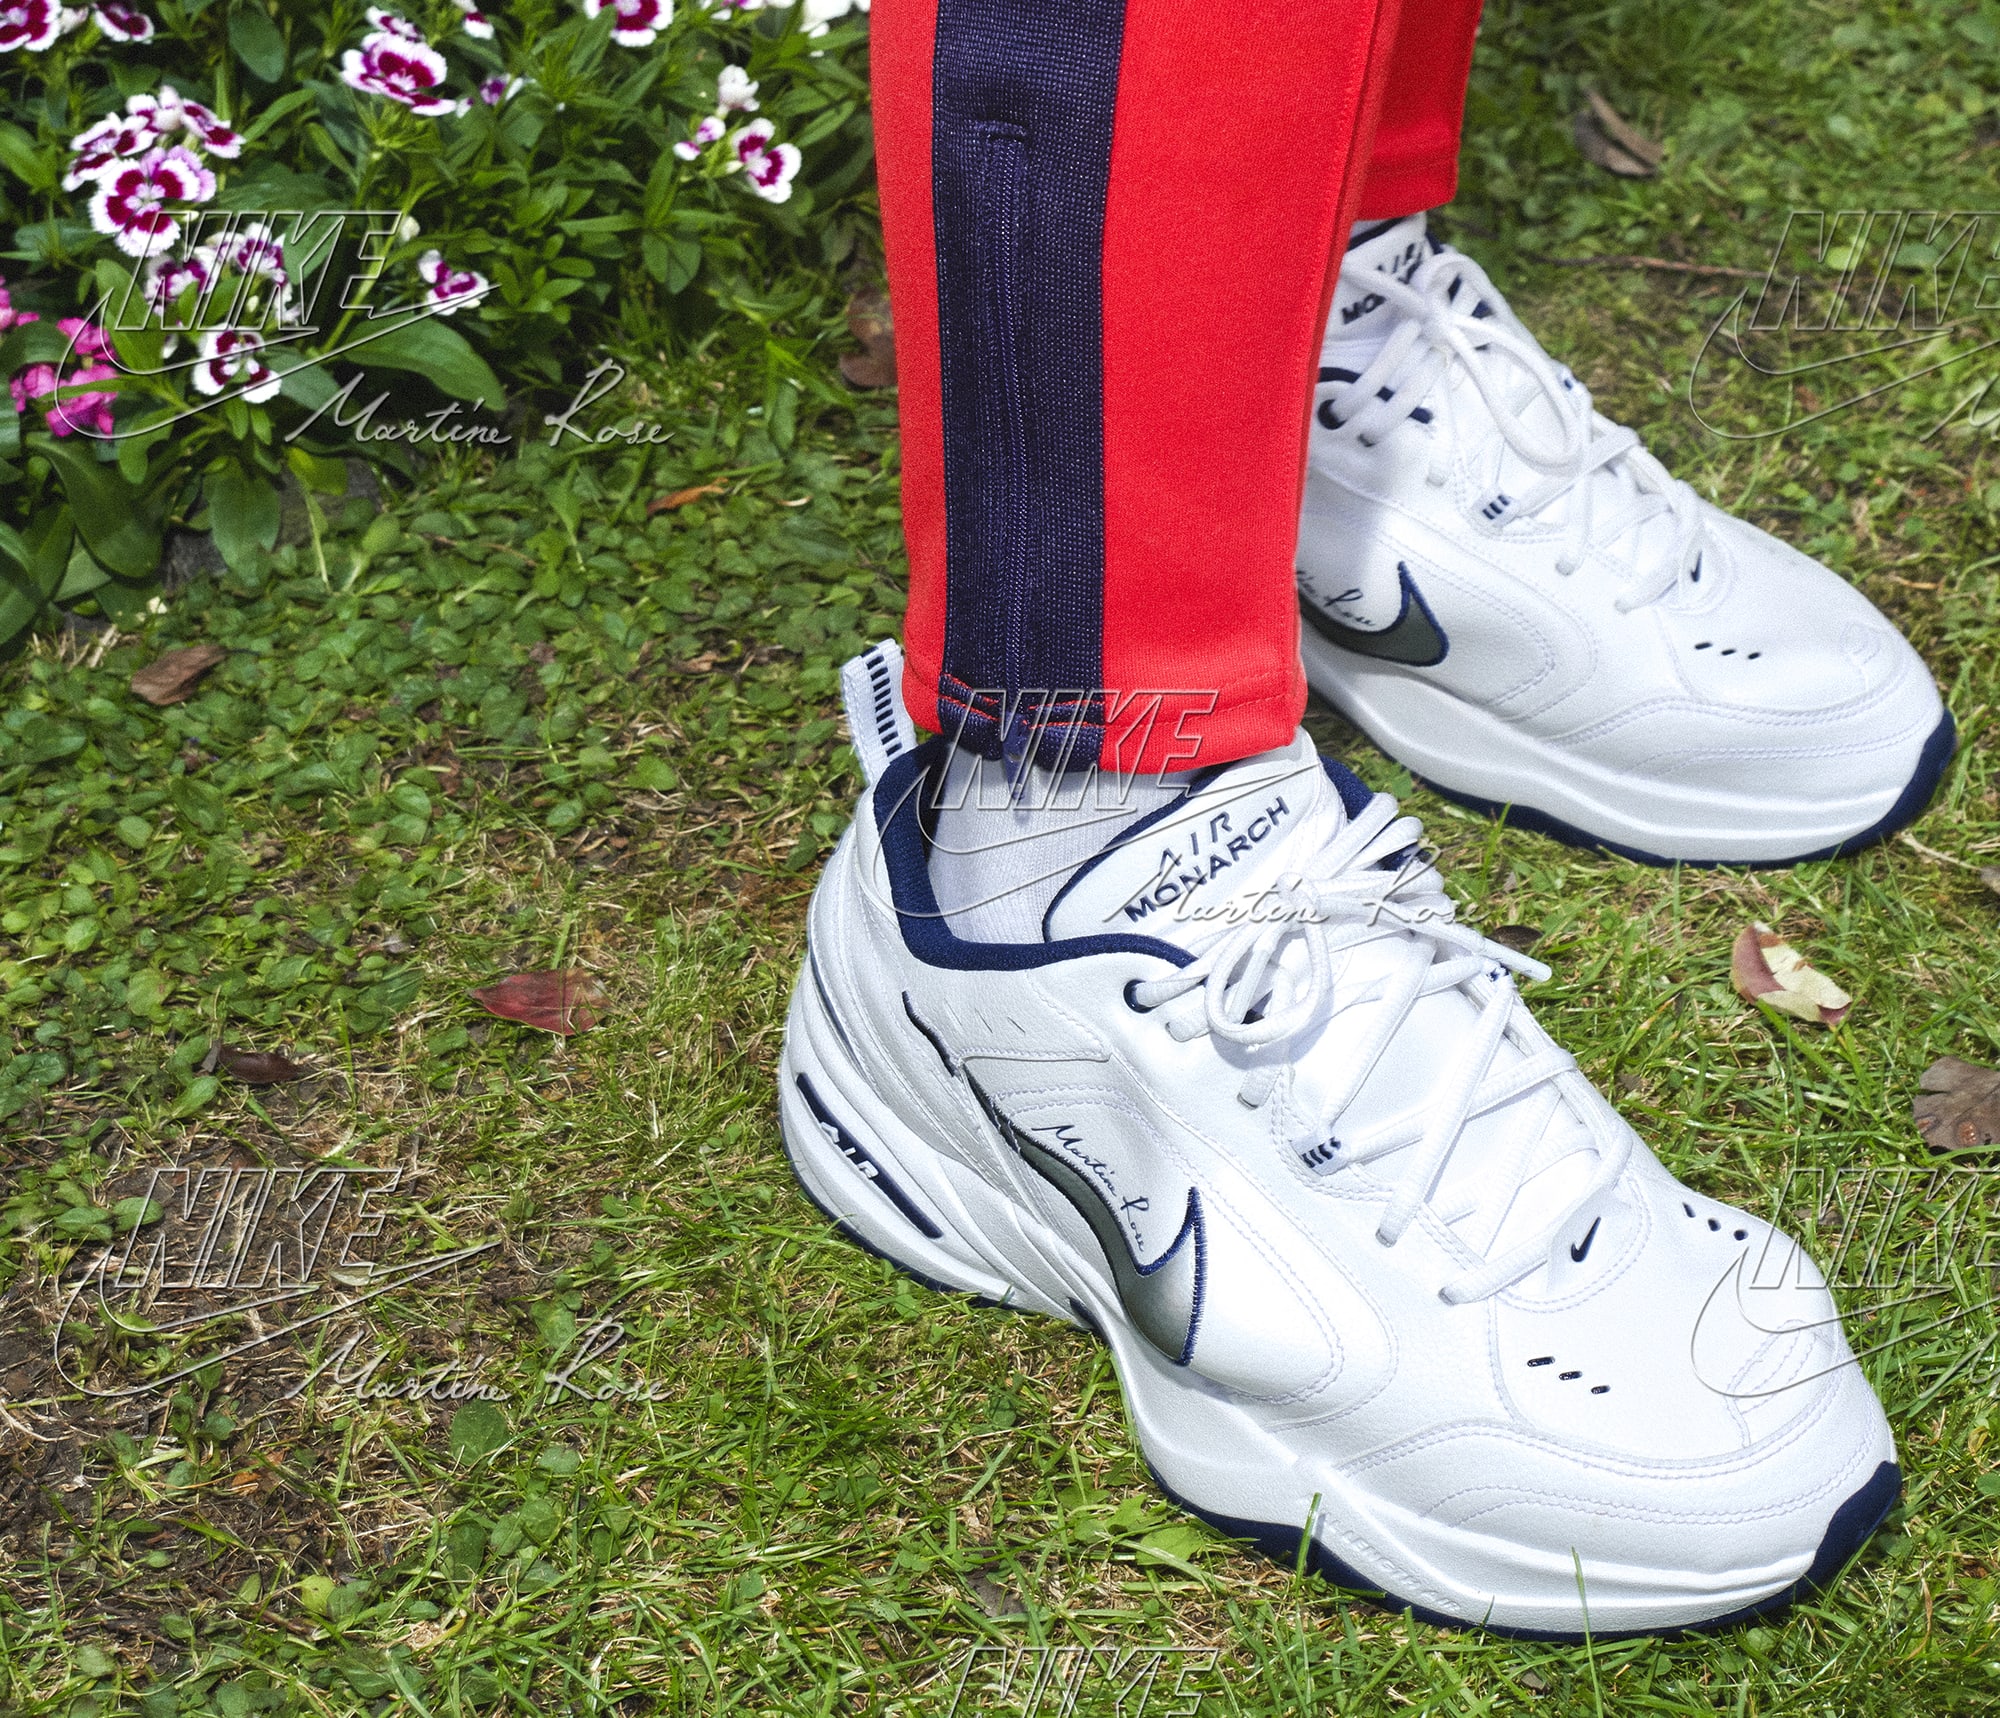 Martine Rose x Nike Air Monarch Collection 3